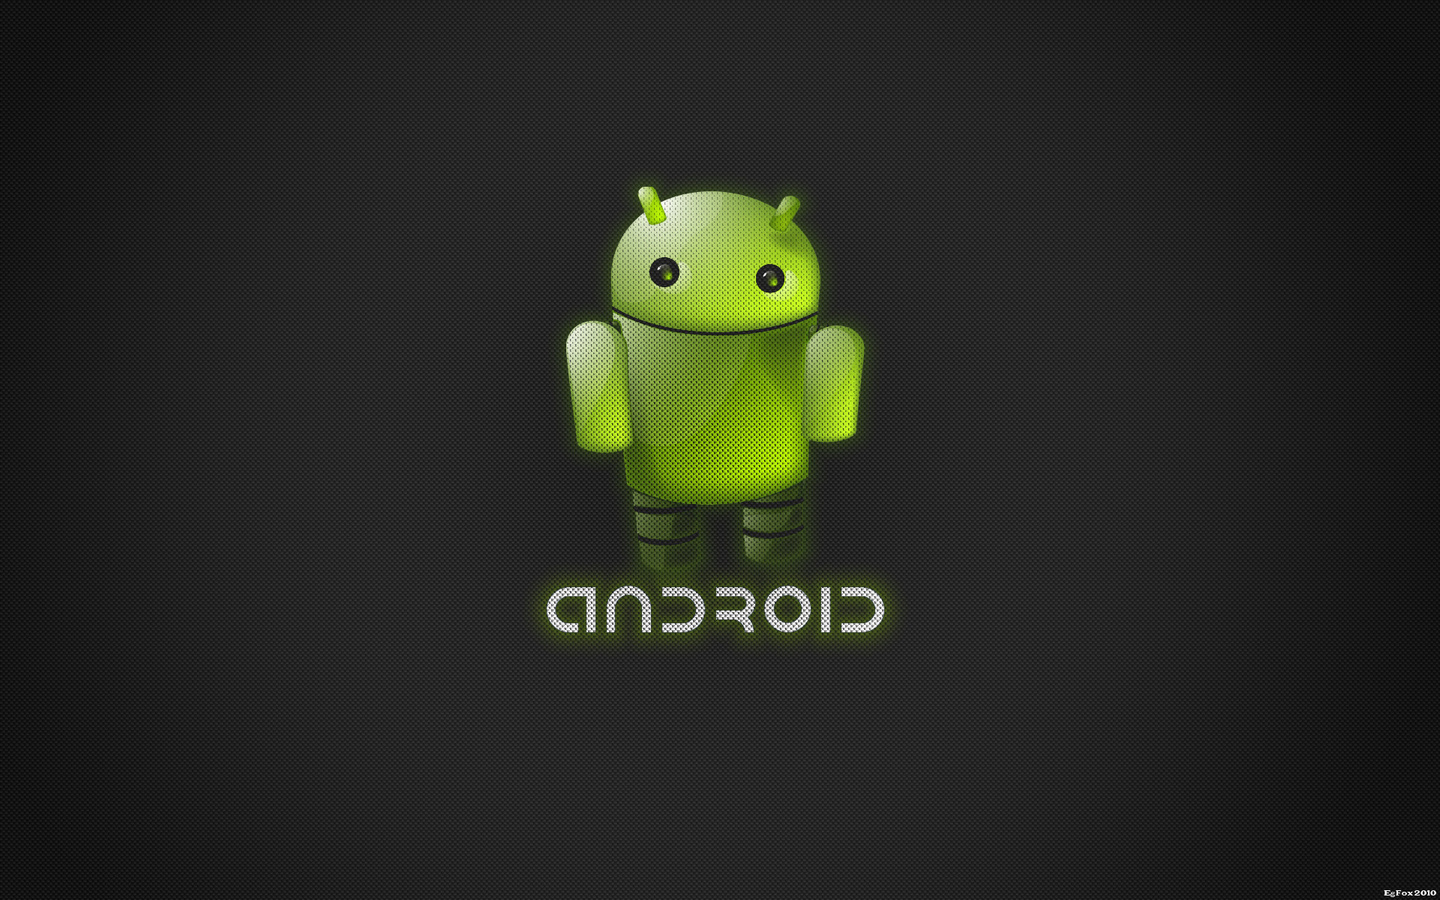 android, logos, brands, background, black